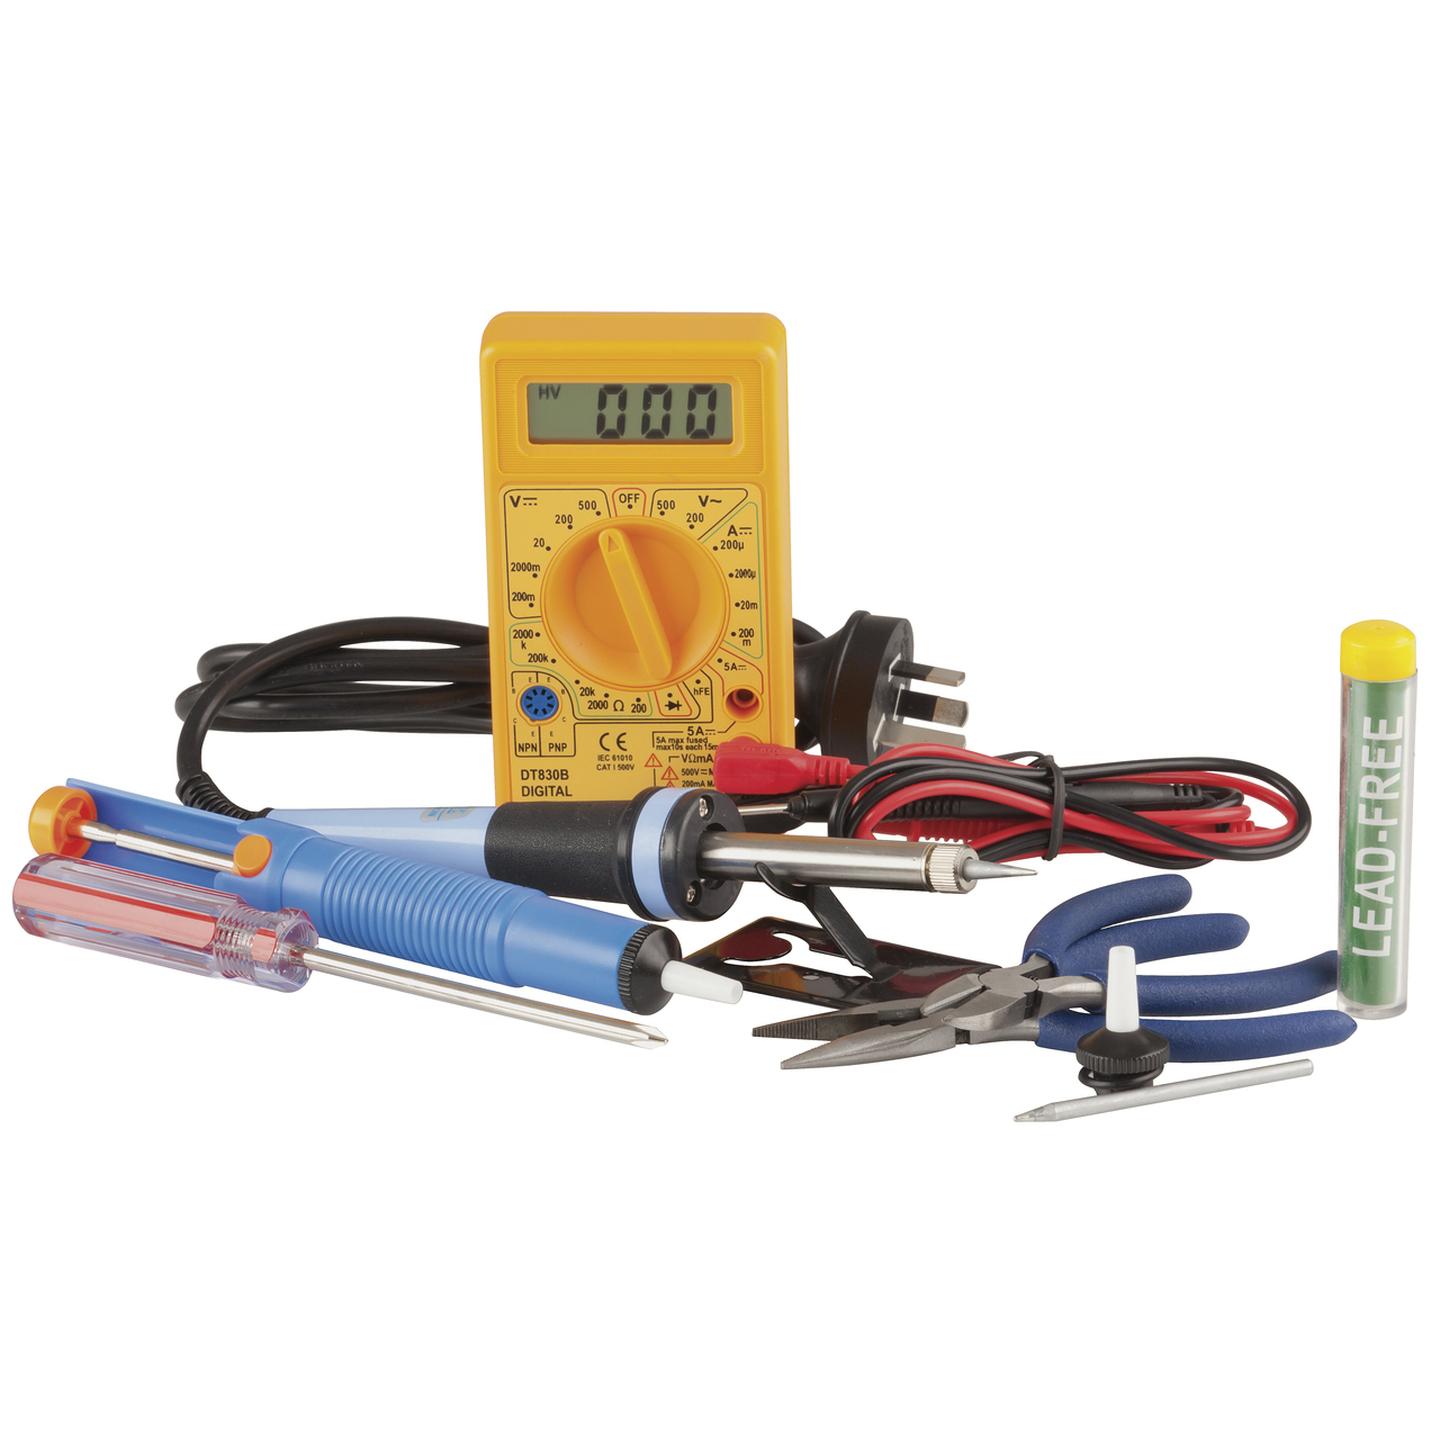 25W Soldering Iron Starter Kit with DMM